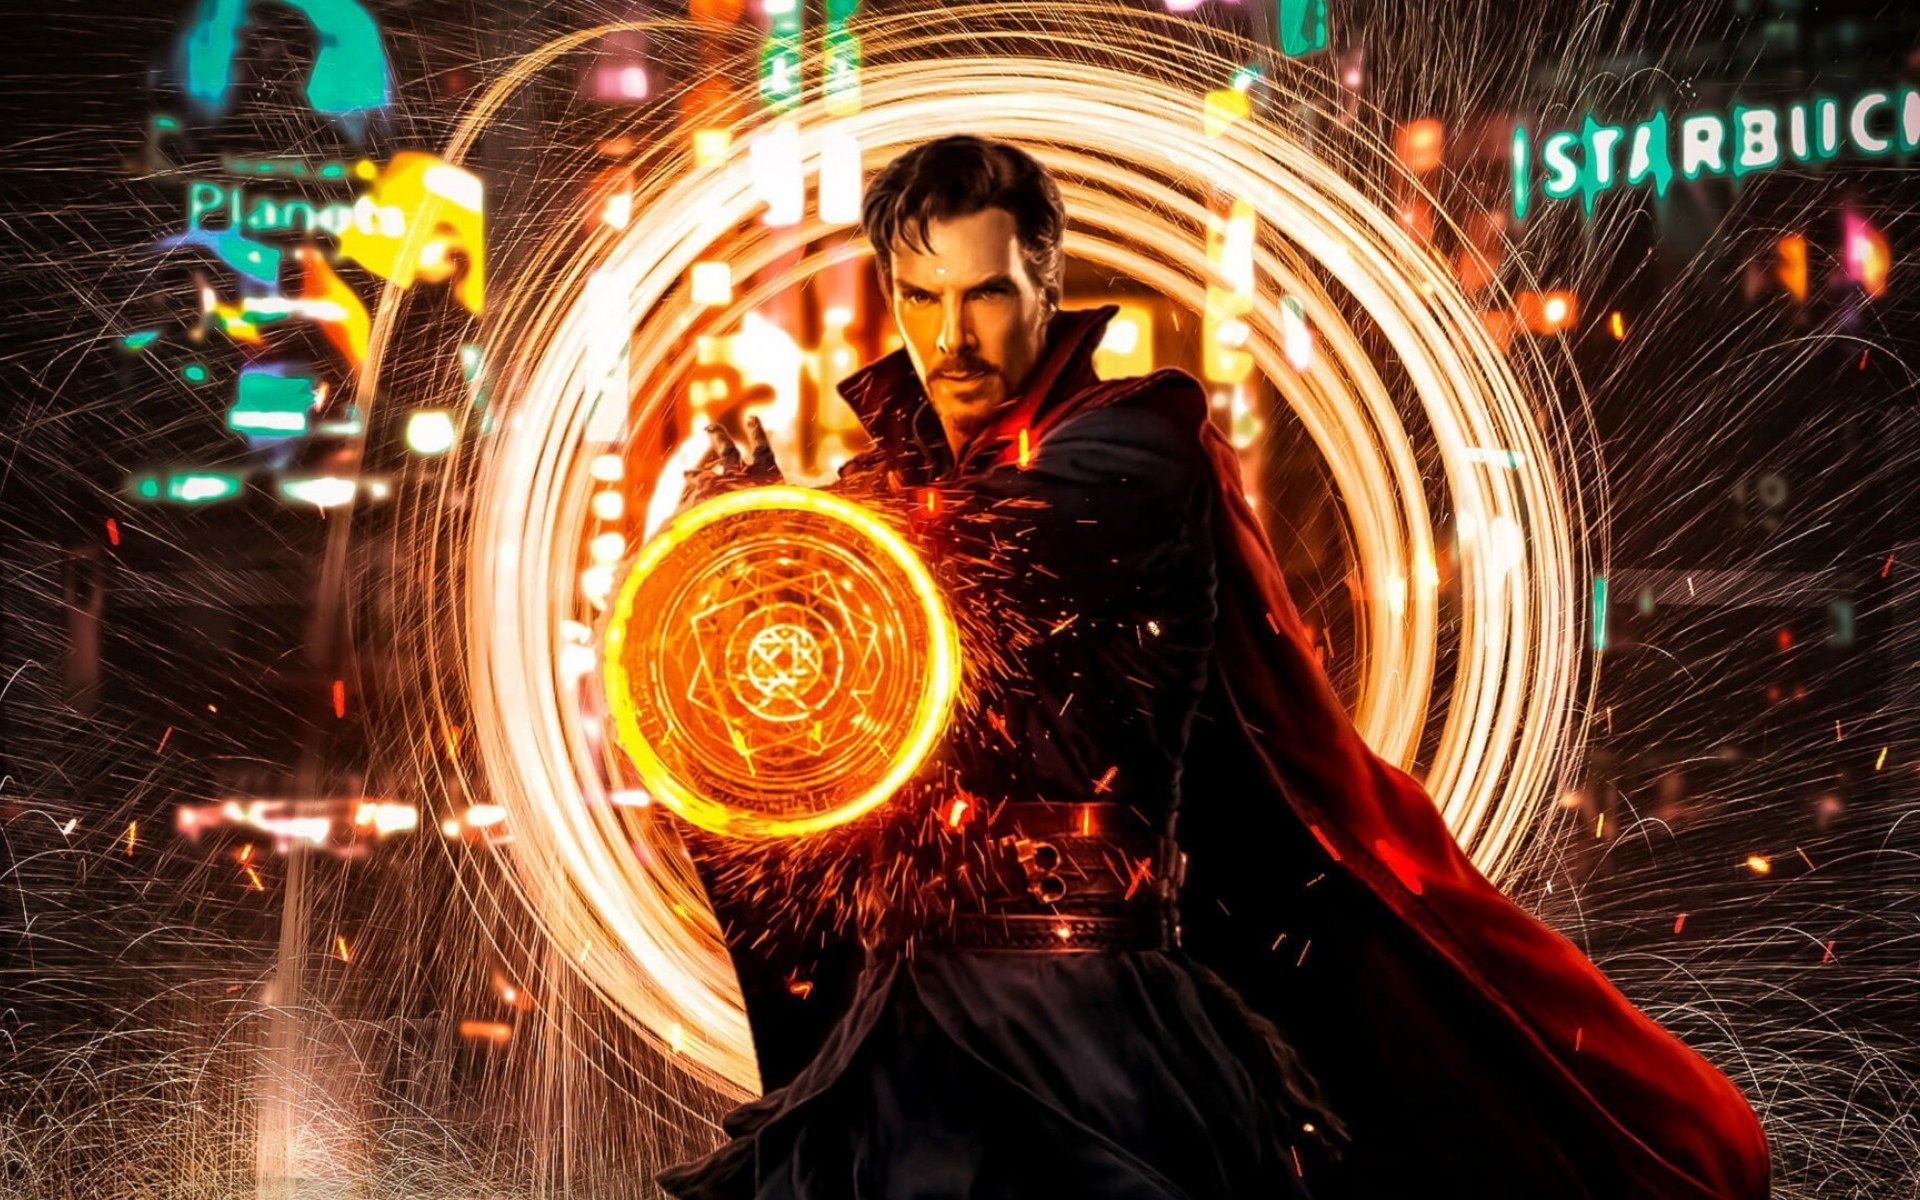 Mosquitoes have no chance - Bulgarian, Doctor Strange, Mosquito repellent, Humor, My